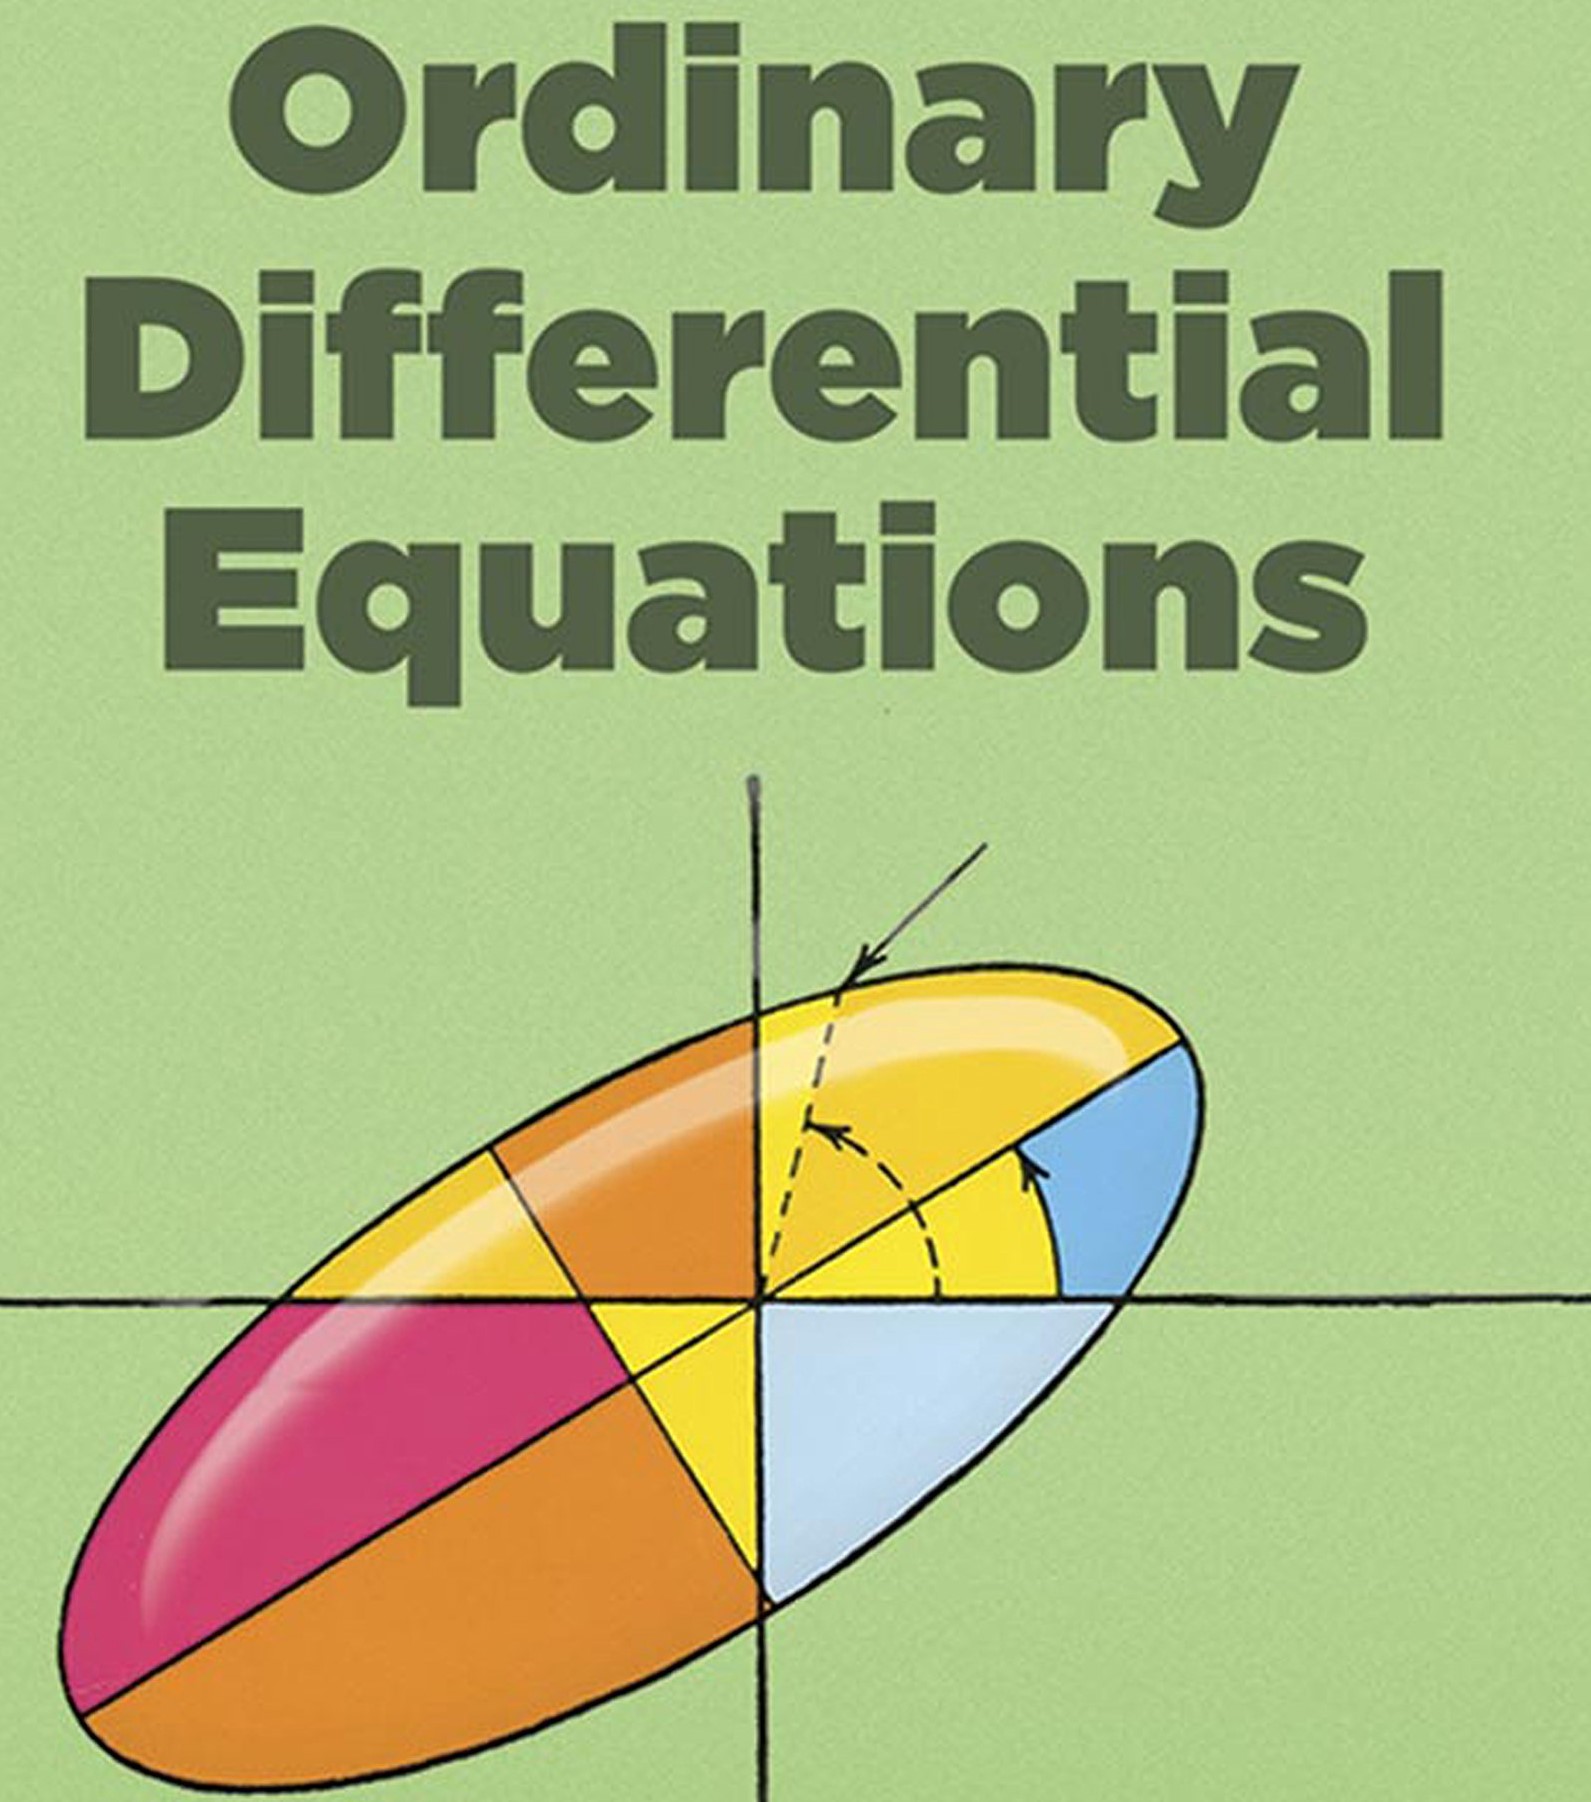 Ordinary differential equation (2022 onwards)